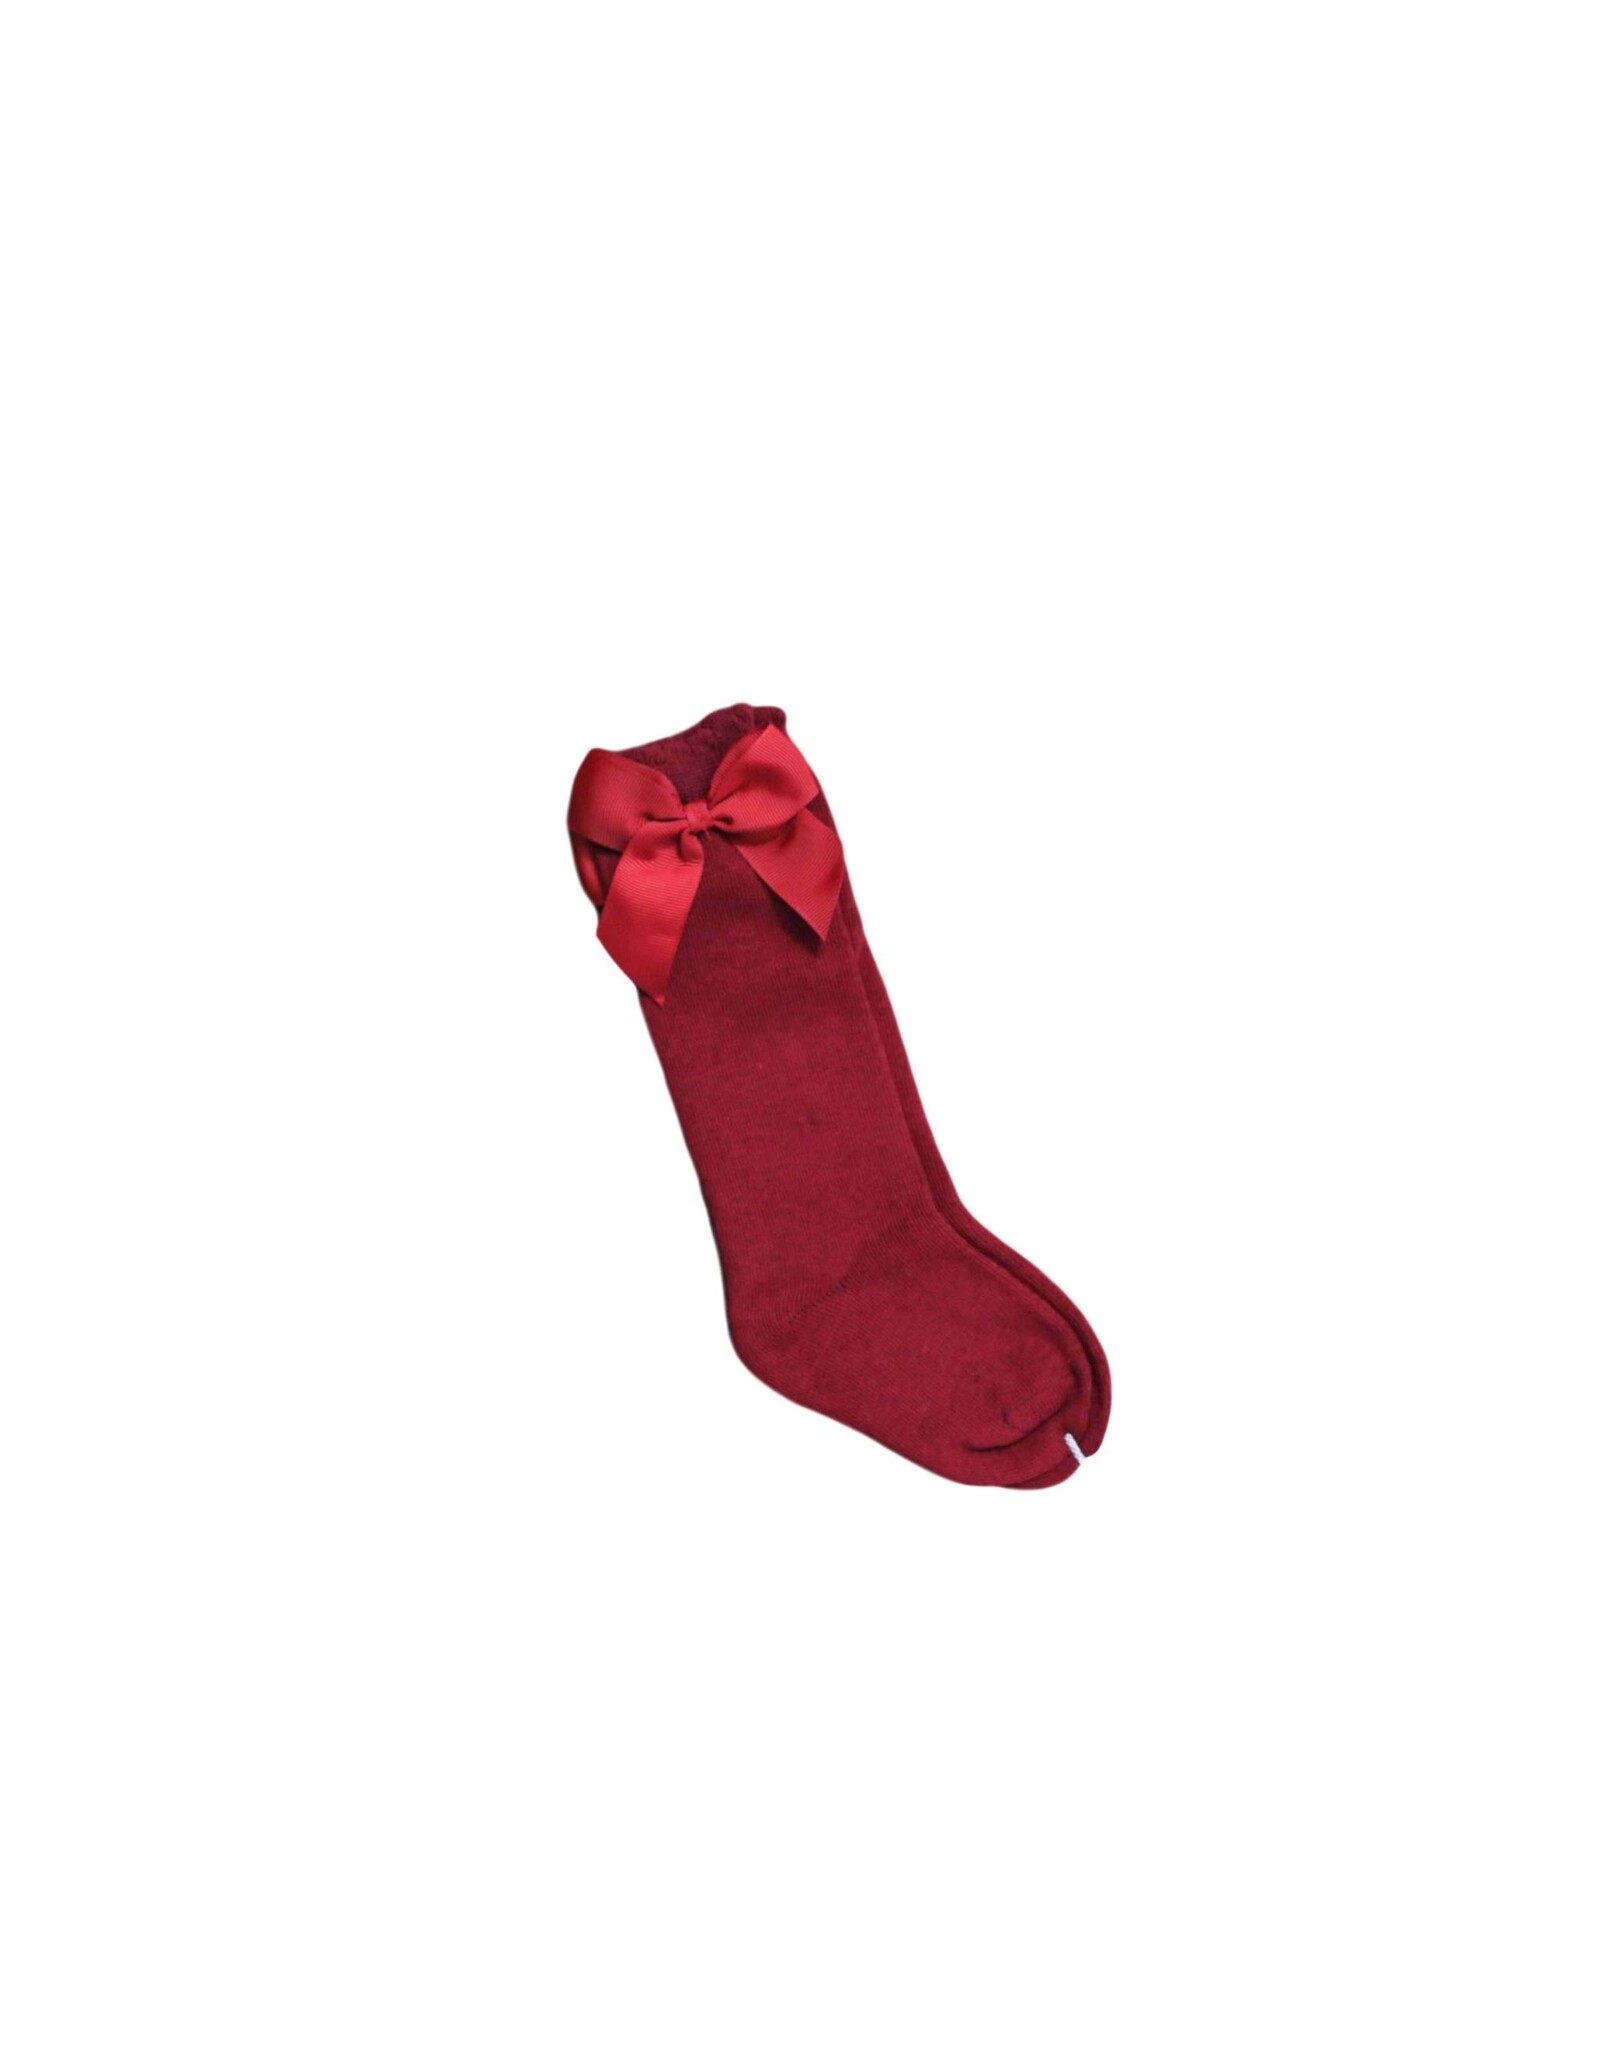 Be Girl Clothing Be Girl- Cranberry Twist Bow Happy Knee Socks